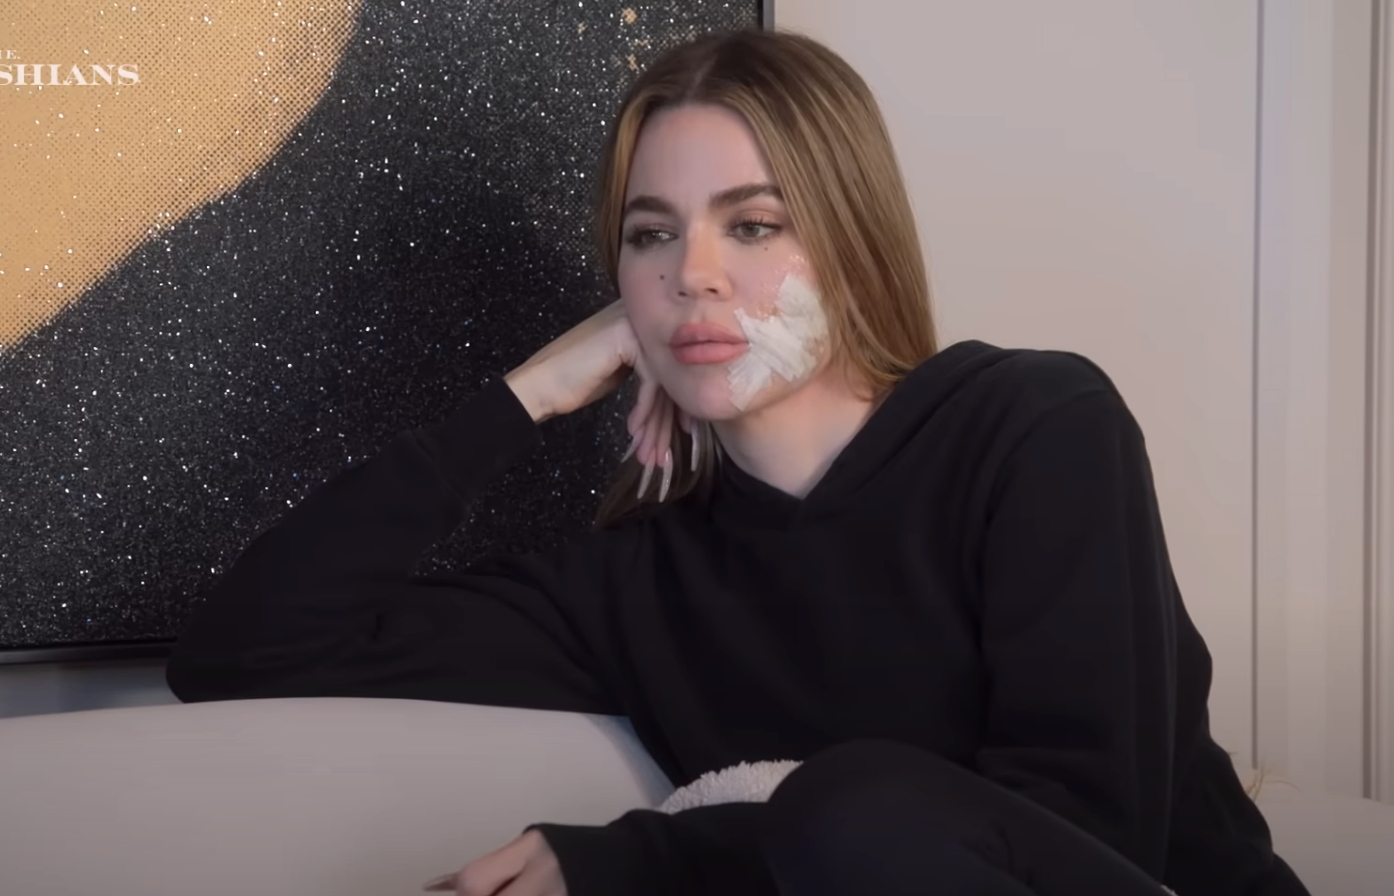 Khloé with a bandage on her face